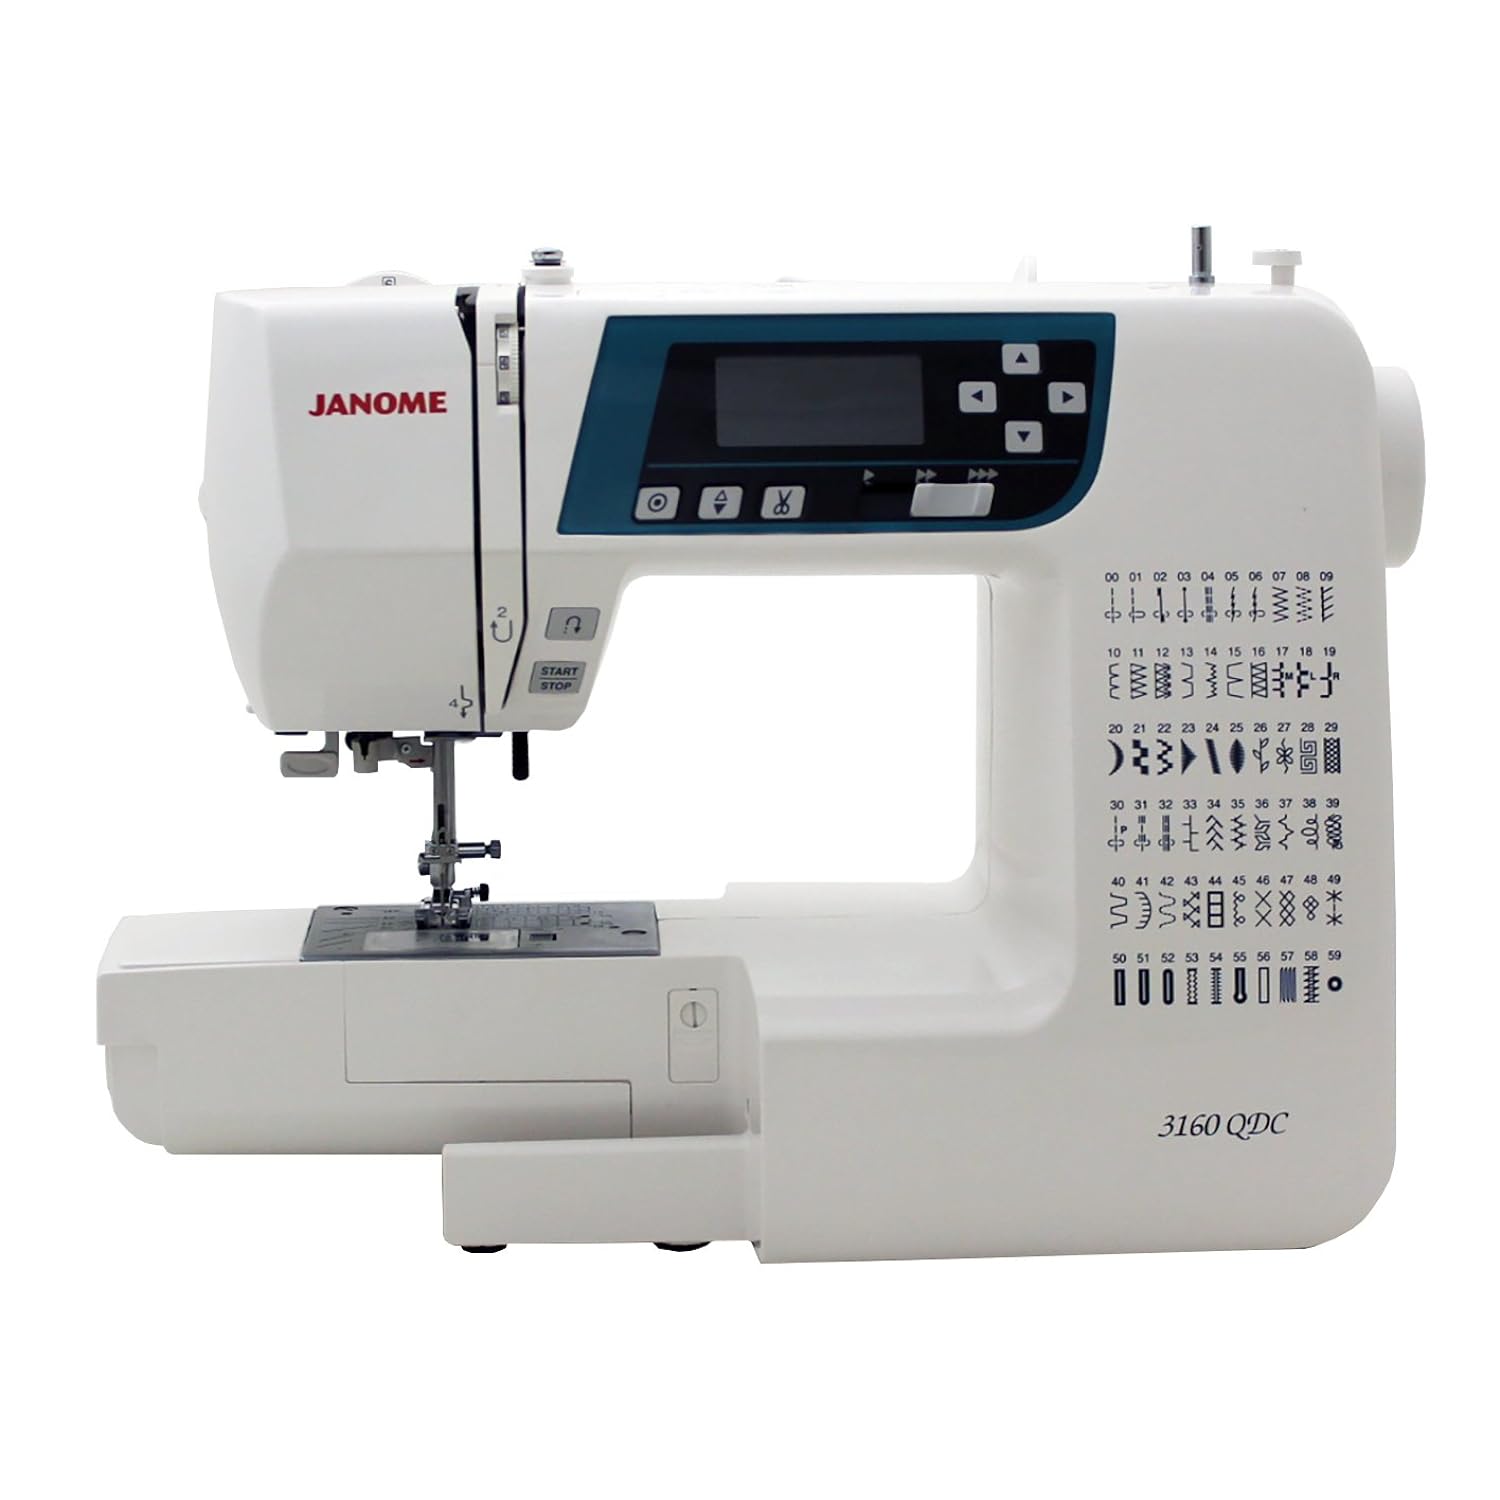 Janome 3160QDC Computerized Sewing Machine (New 2020 Tan Color) w/Hard Cover + Extension Table + Quilt Kit + 1/4 Seam Foot w/…